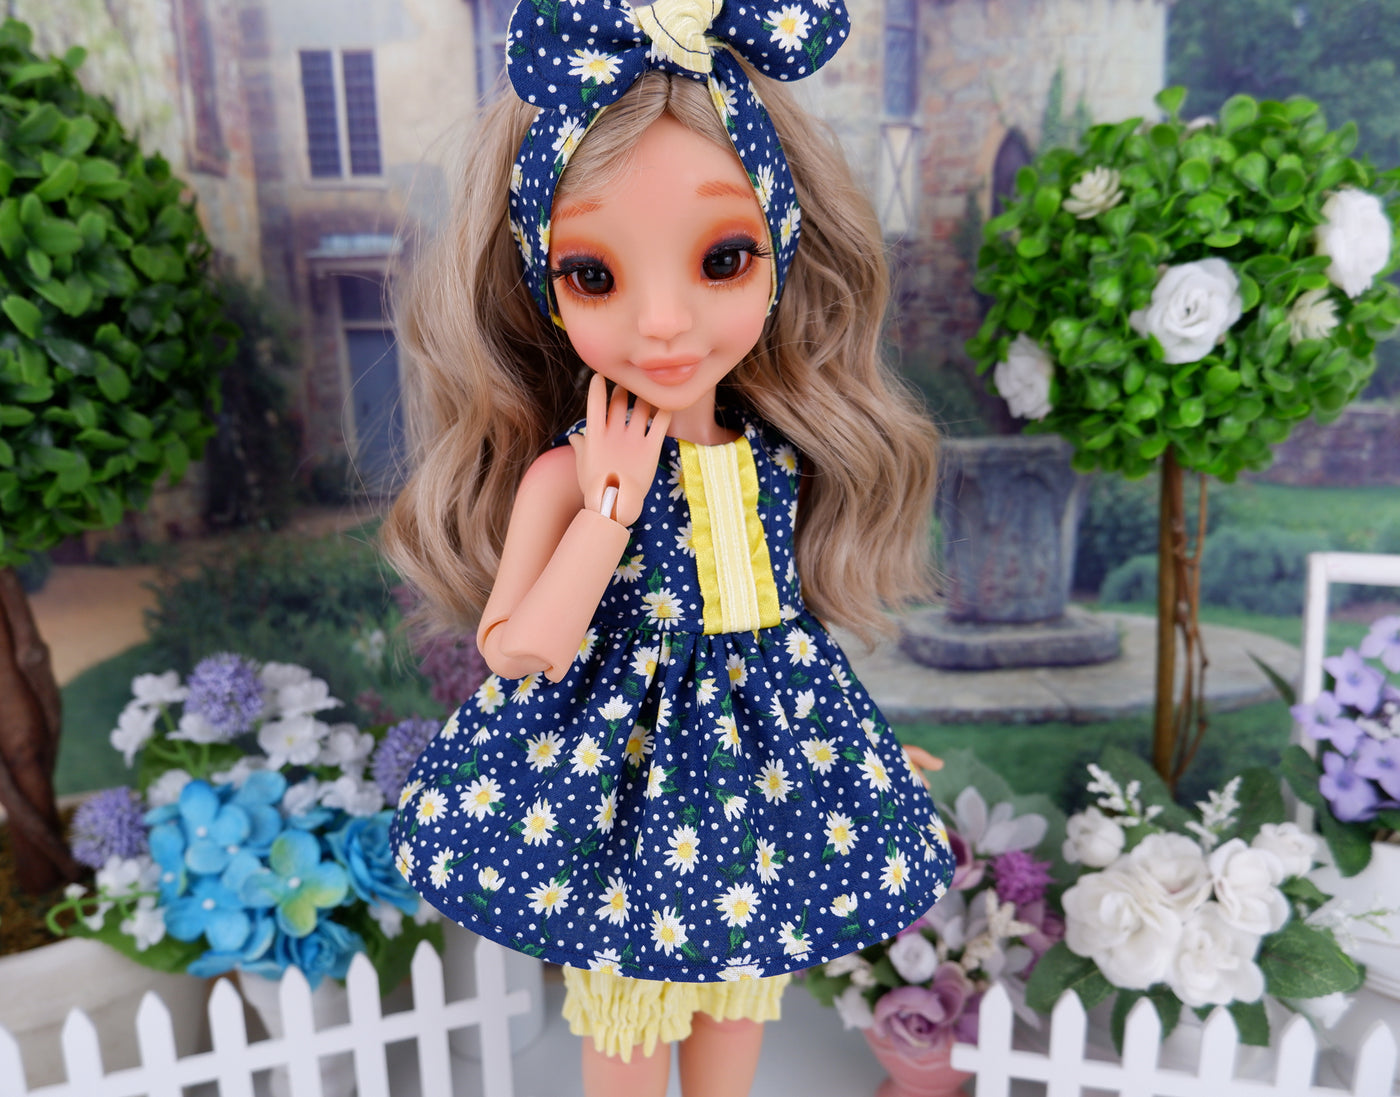 Delightful Daisy - top & bloomers with shoes for Ava doll BJD